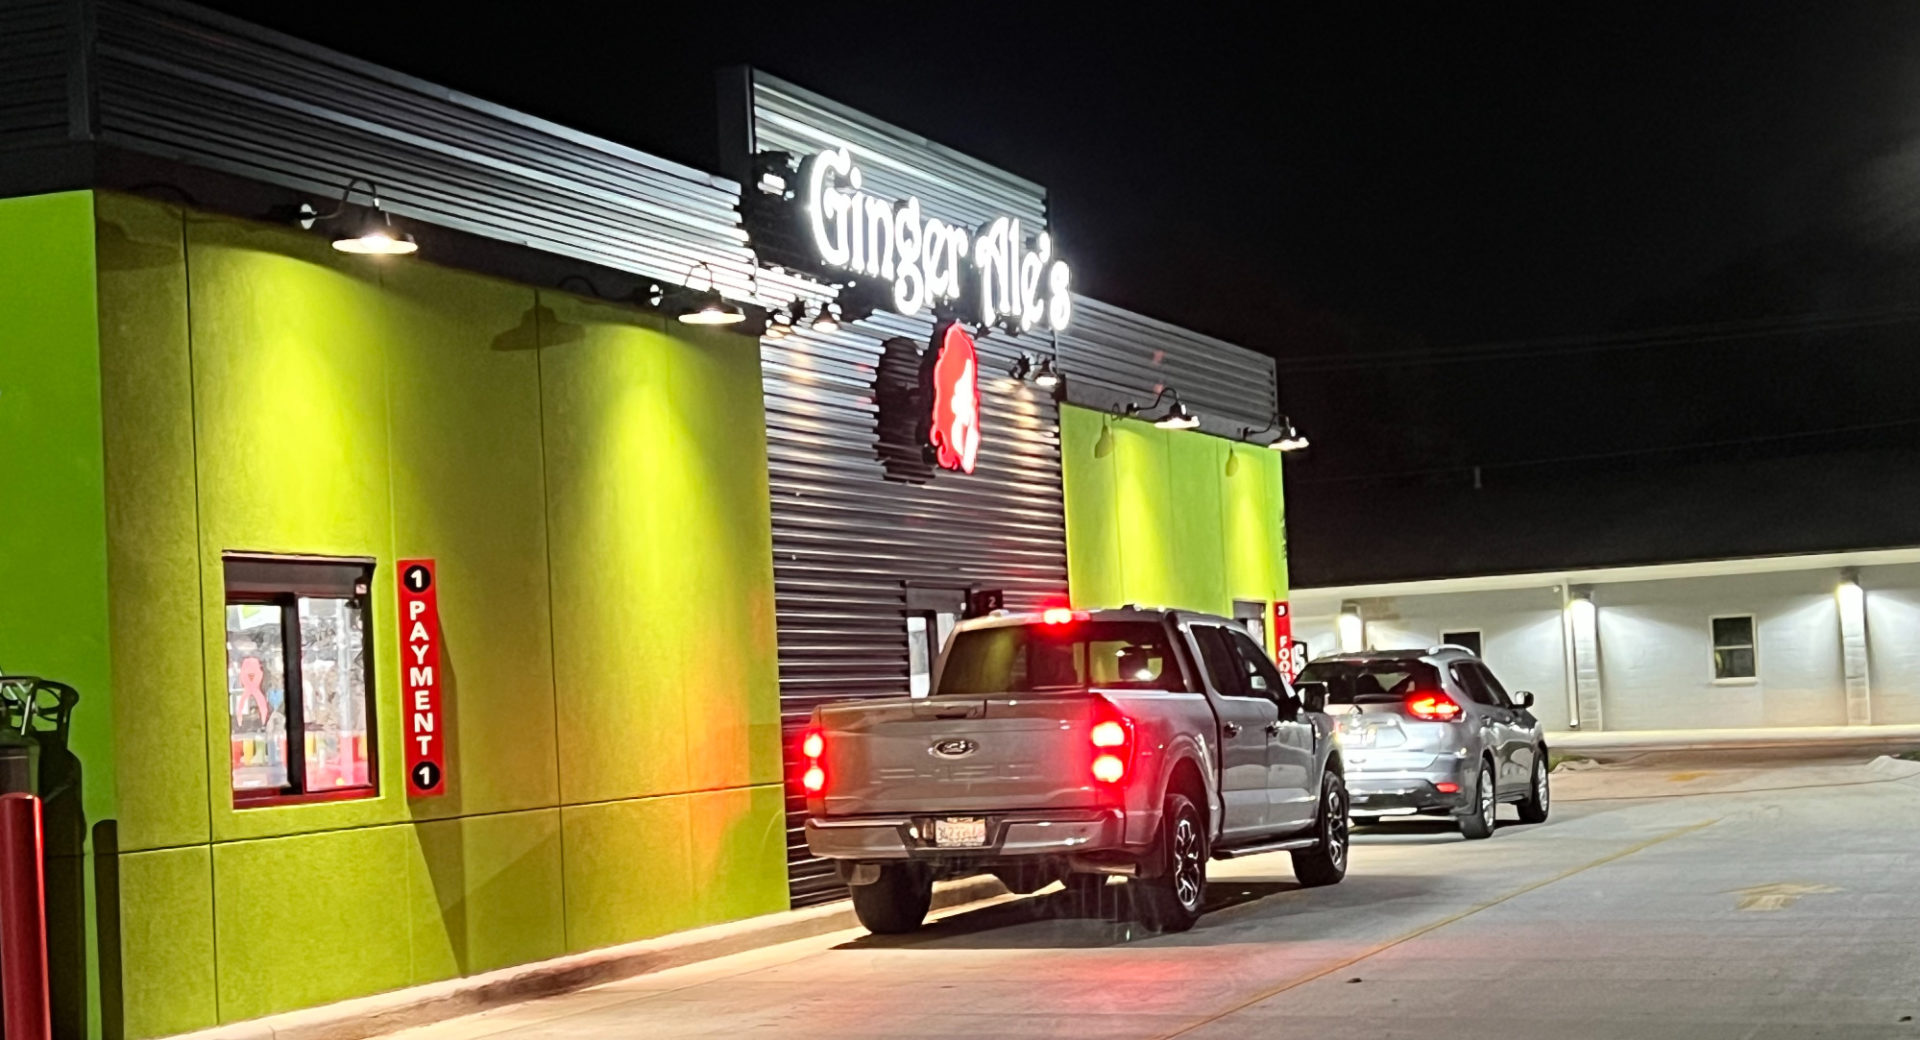 Ginger Ale's of Savoy drive-through at night with two vehicles in line at the lime green building.